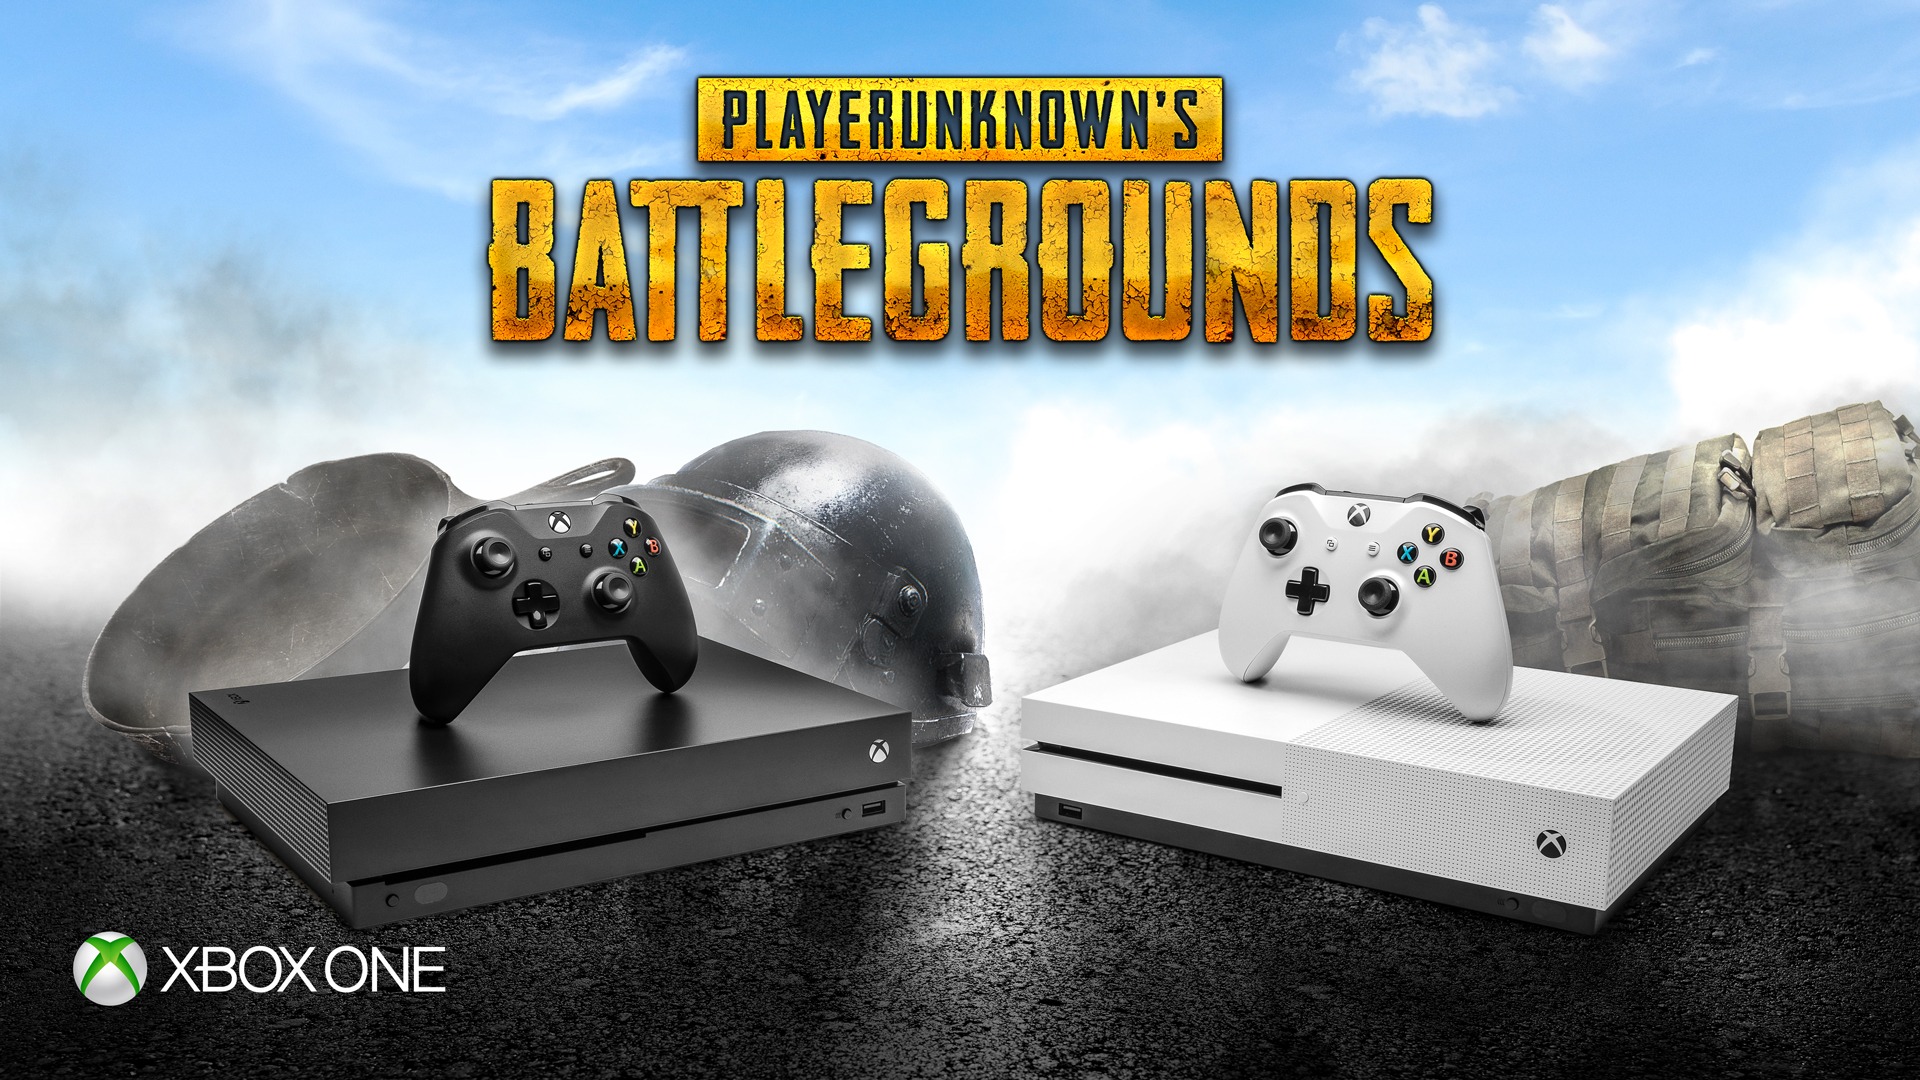 PUBG Coming to Xbox One on December 12, 2017